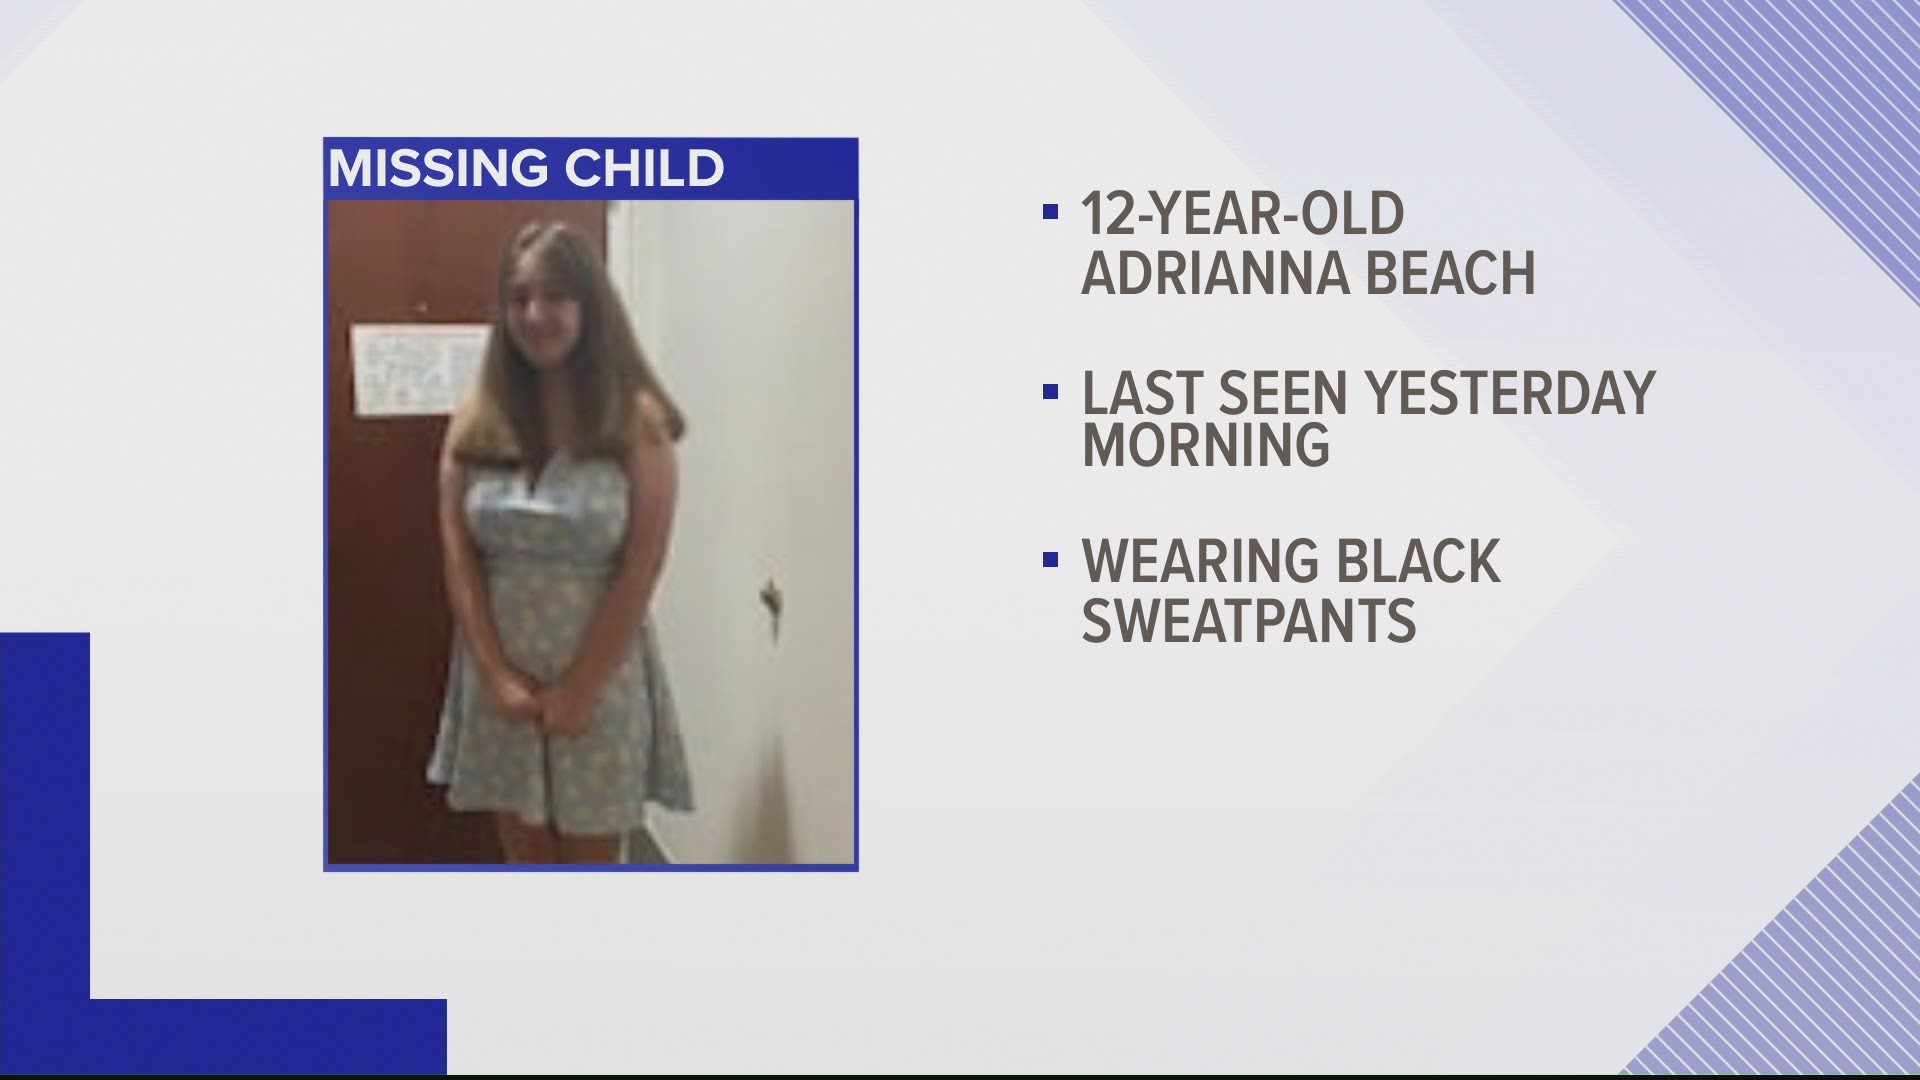 Adrianna Beach is believed to be a runaway.